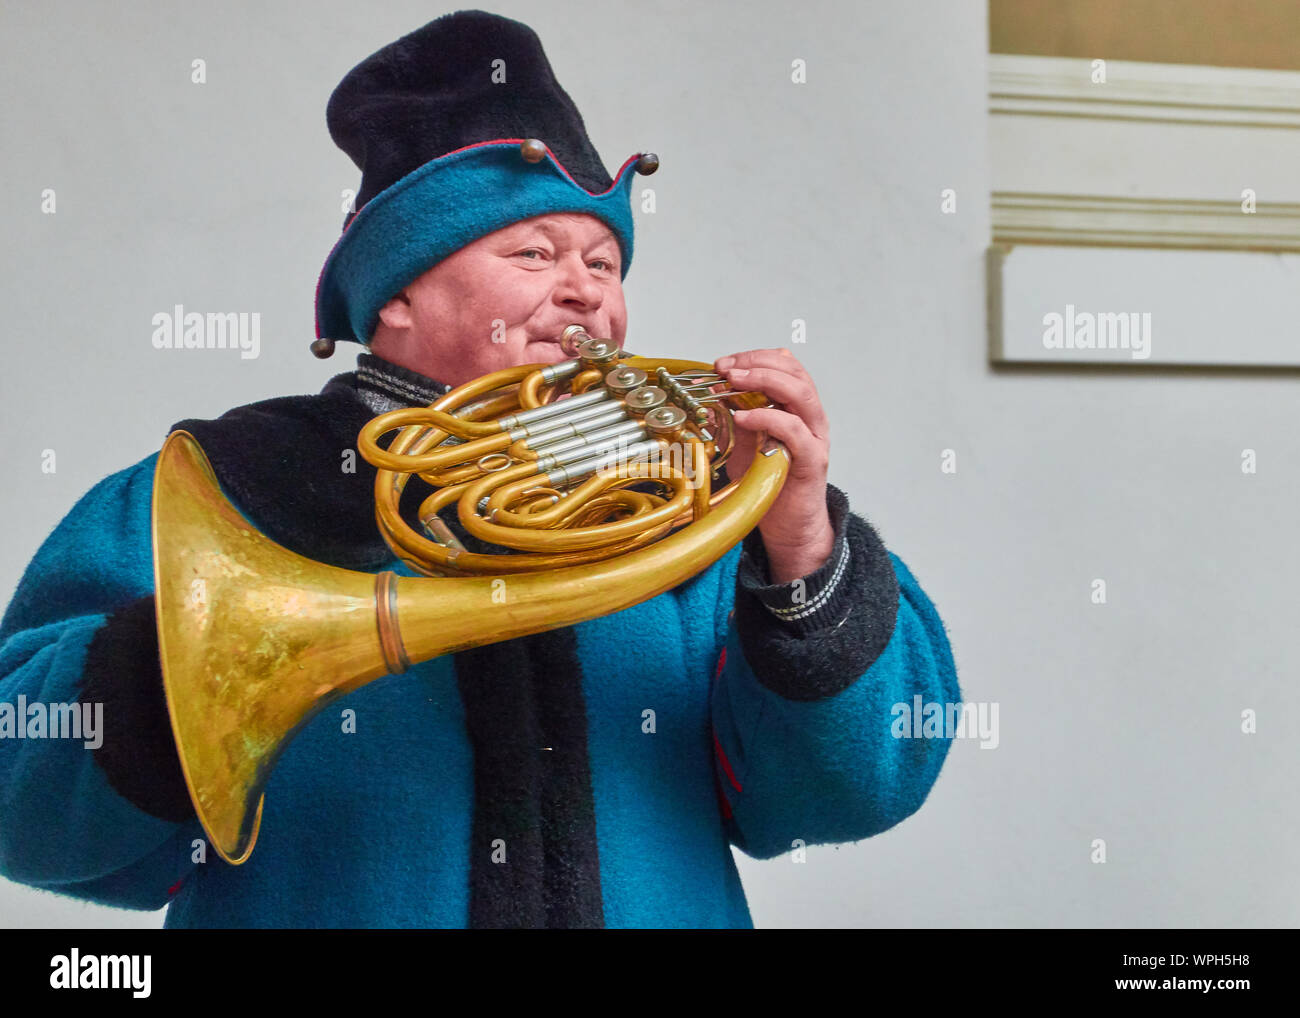 Dresden, Germany, December 14., 2018:Horn blower in a historical blue dress plays on the old horn outdoors in front of a white wall Stock Photo